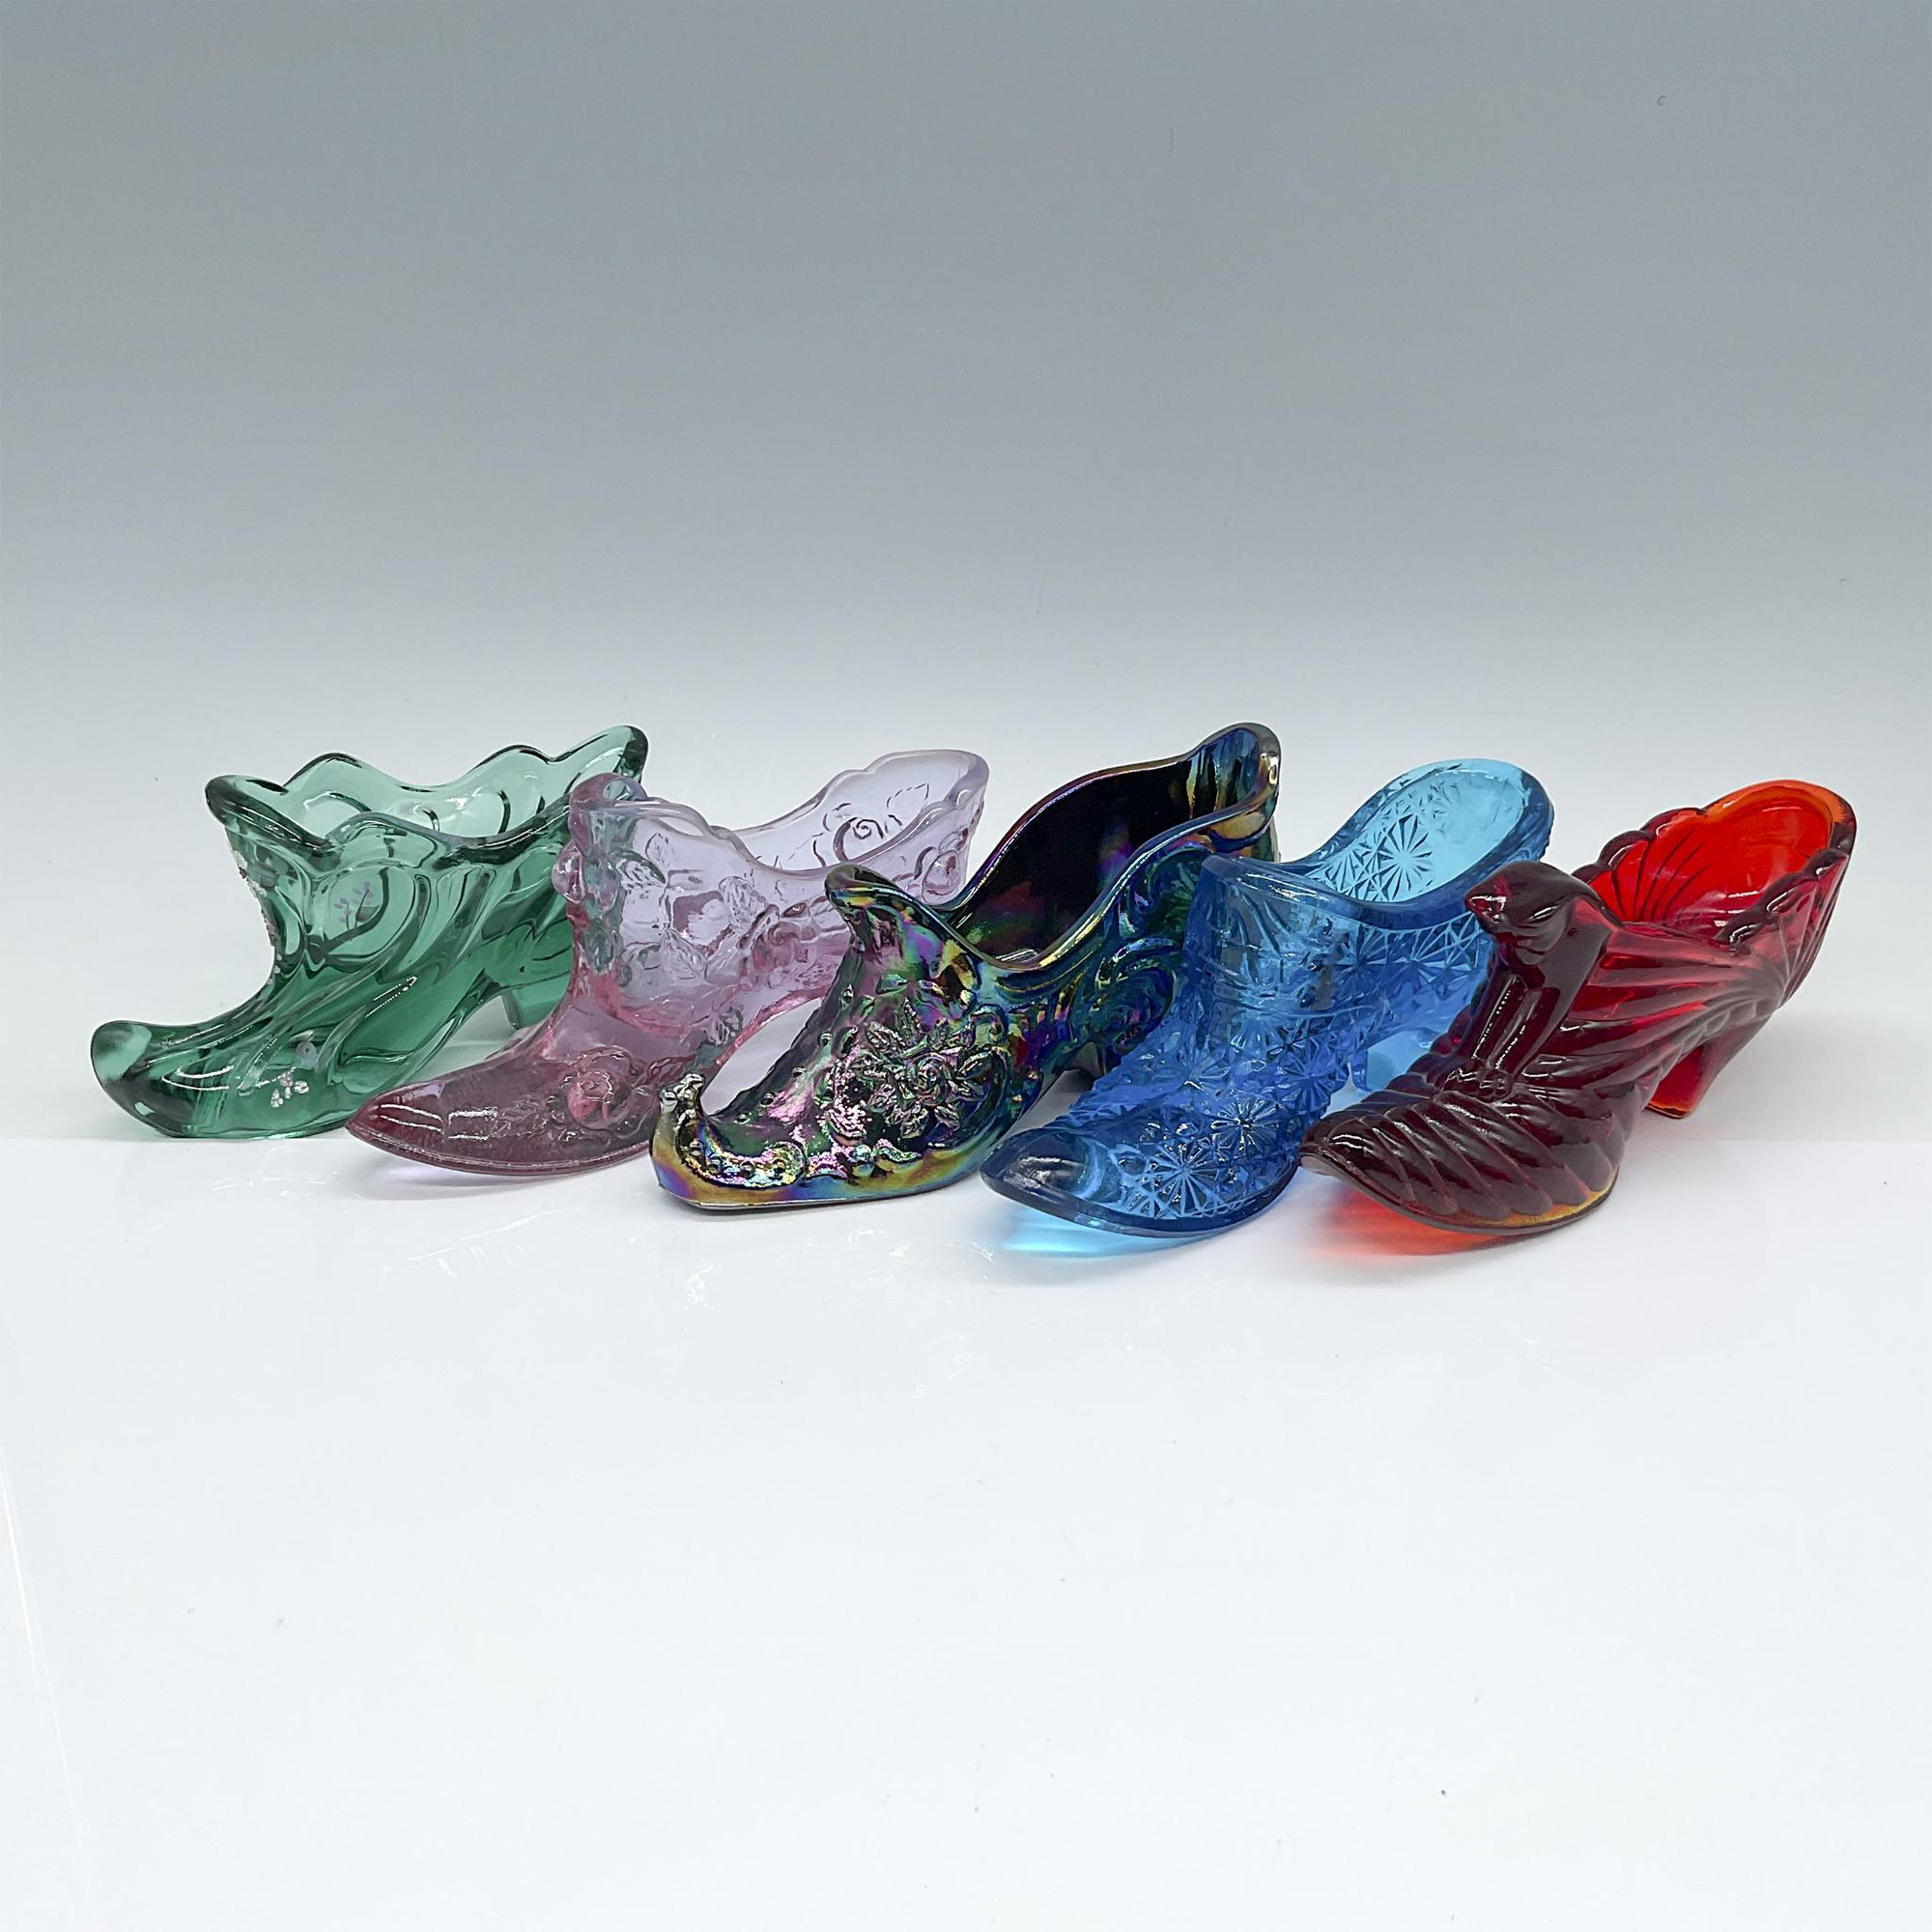 5pc Vintage Color Glass Shoes/Slippers, Fenton and Mosser - Image 2 of 4